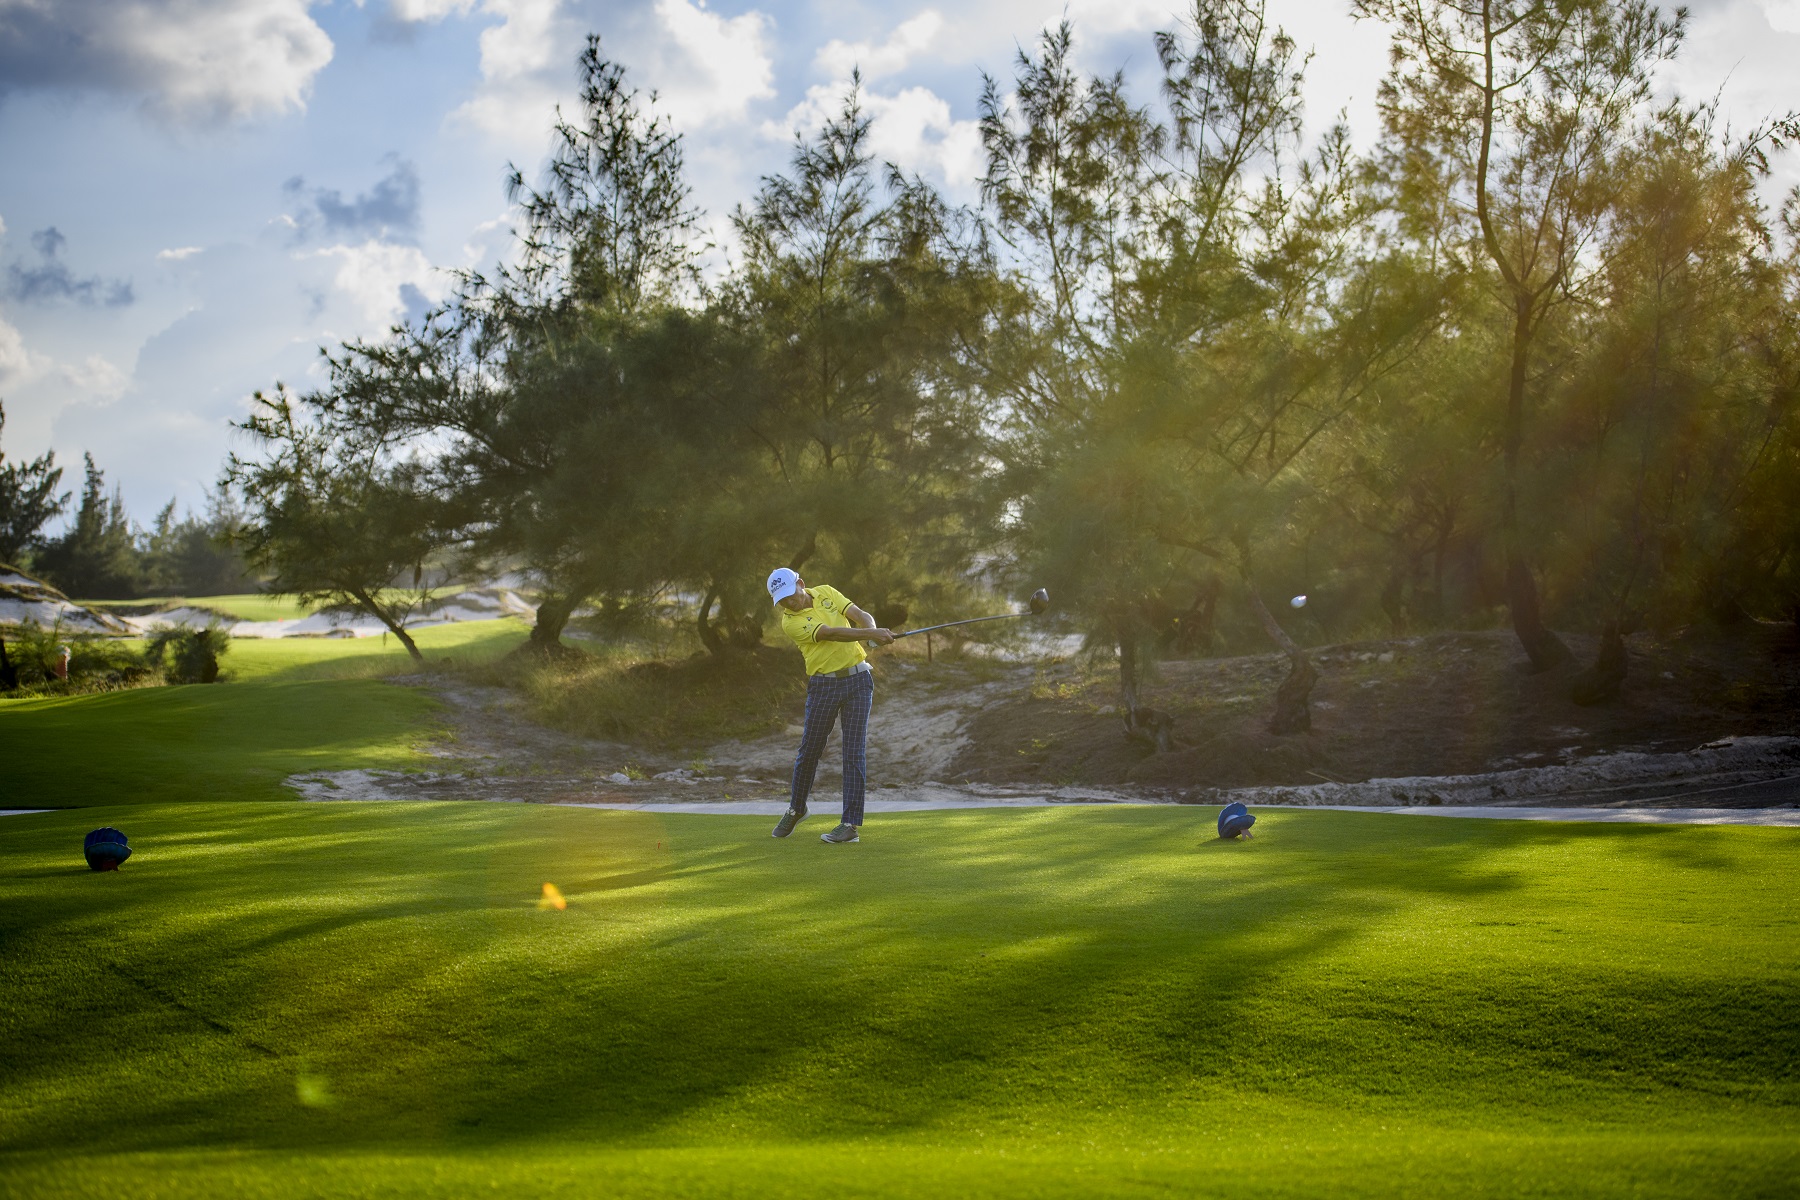 A super-hot check-in spot that golfers should not miss this summer - Figure 3.